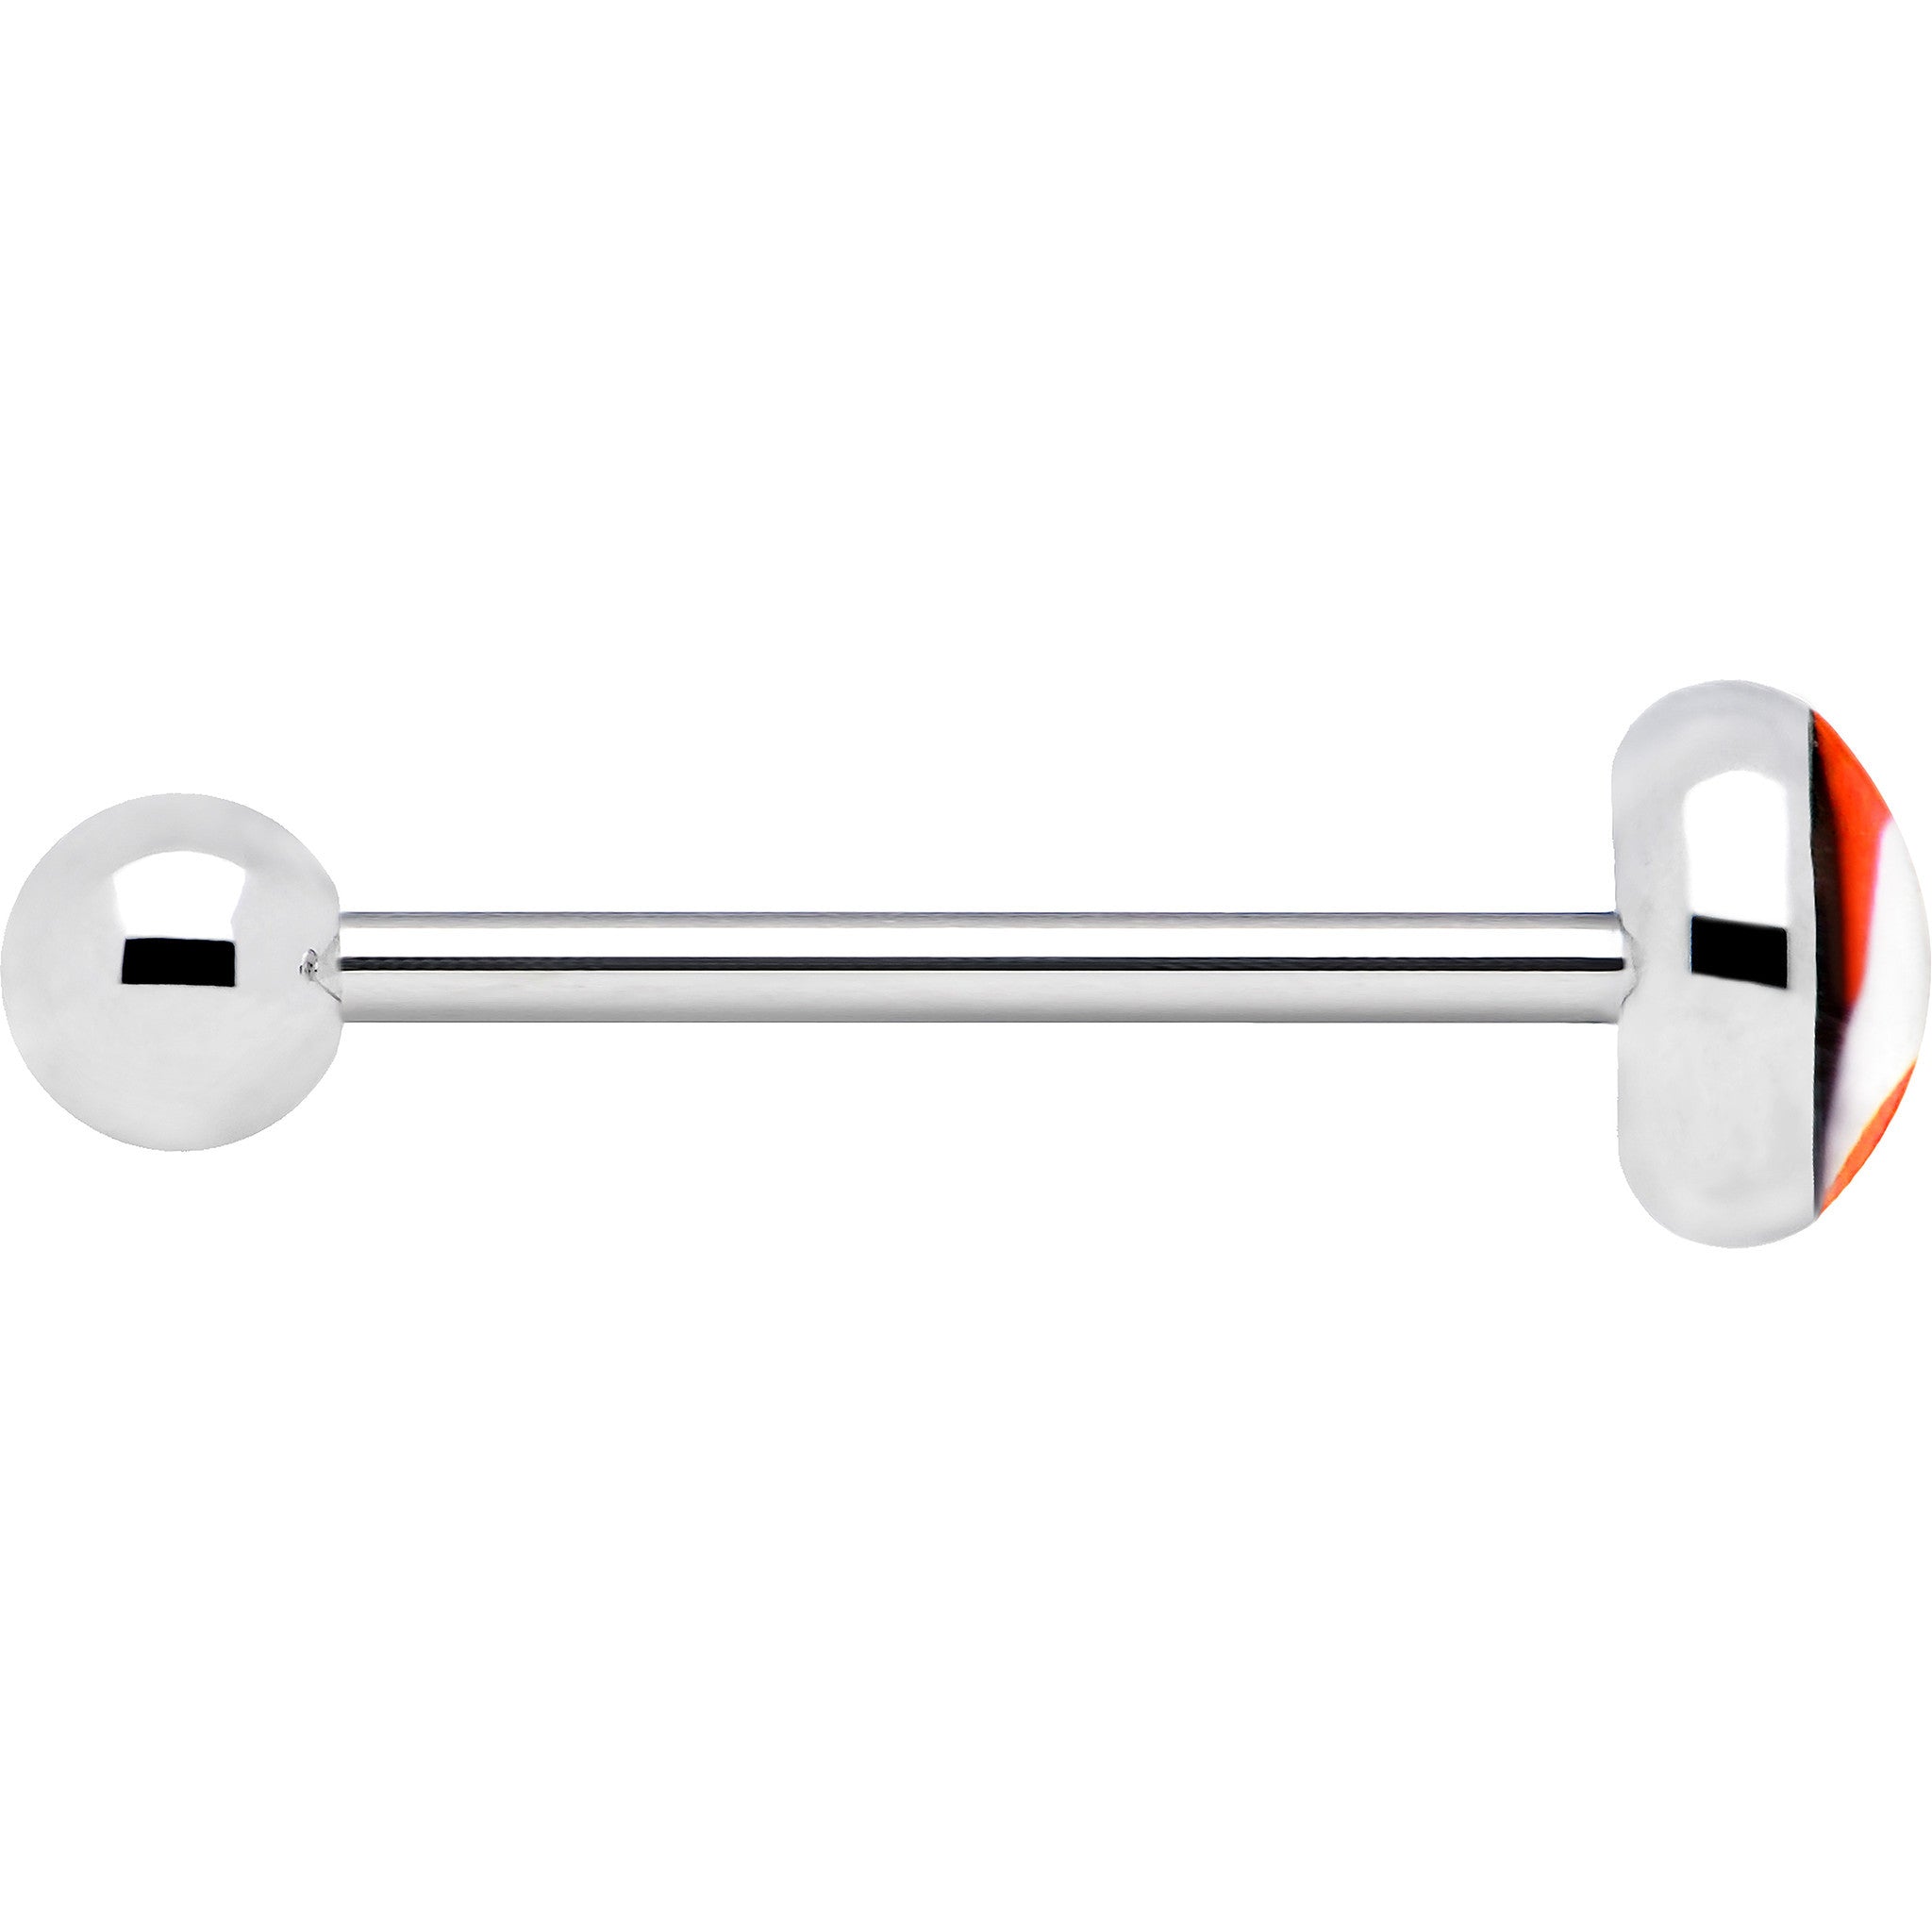 Stainless Steel Puerto Rico Flag Barbell Tongue Ring